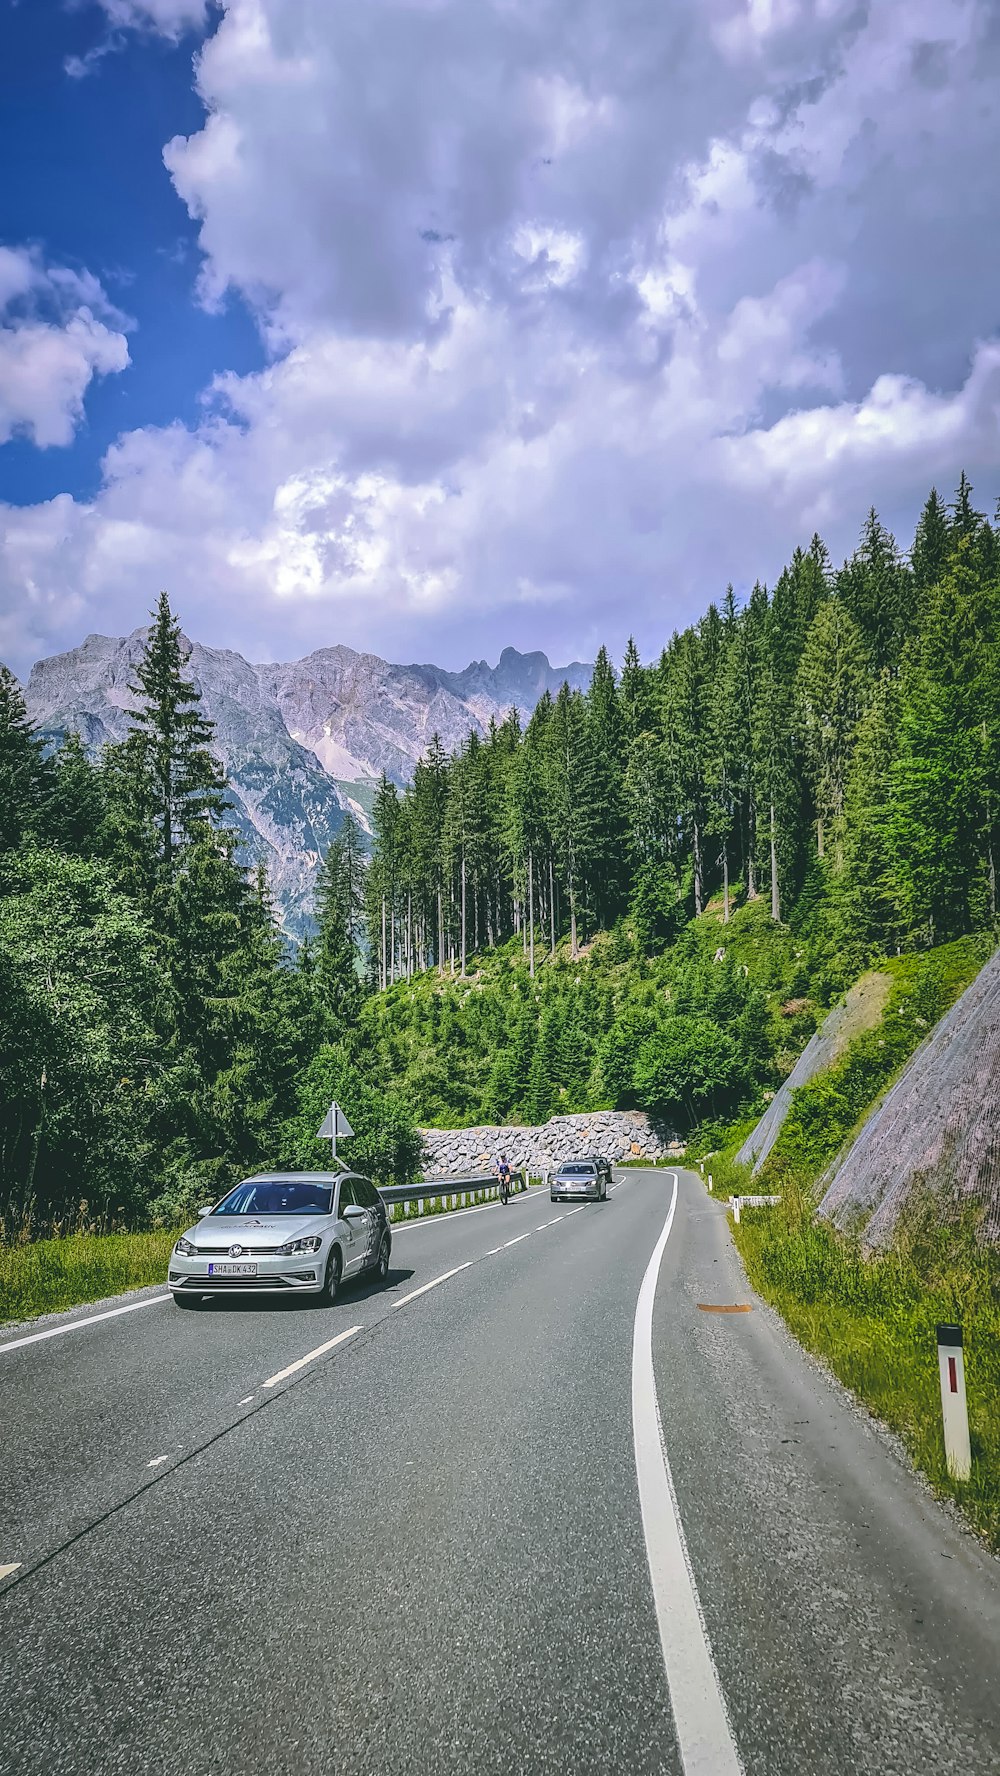 black car on road near green trees and mountain under blue sky and white clouds during